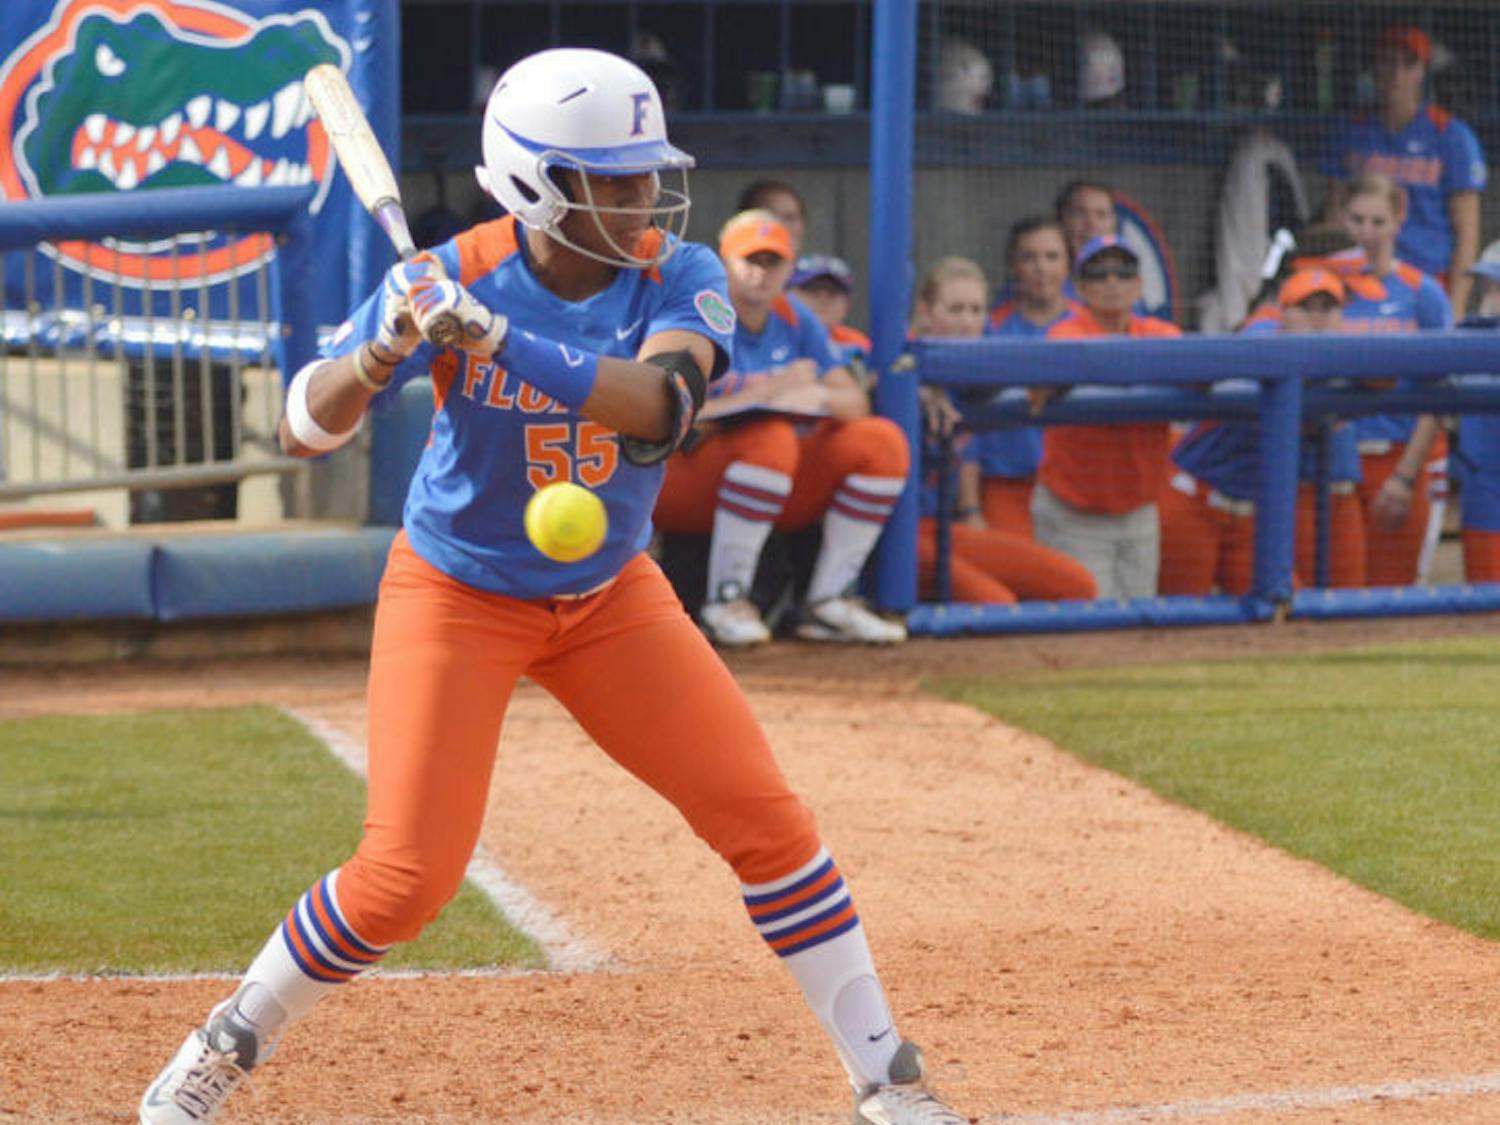 Briana Little bats during Florida’s 8-0 win against Indiana on Feb. 22 at Katie Seashole Pressly Stadium. Little has six RBIs since April 11.